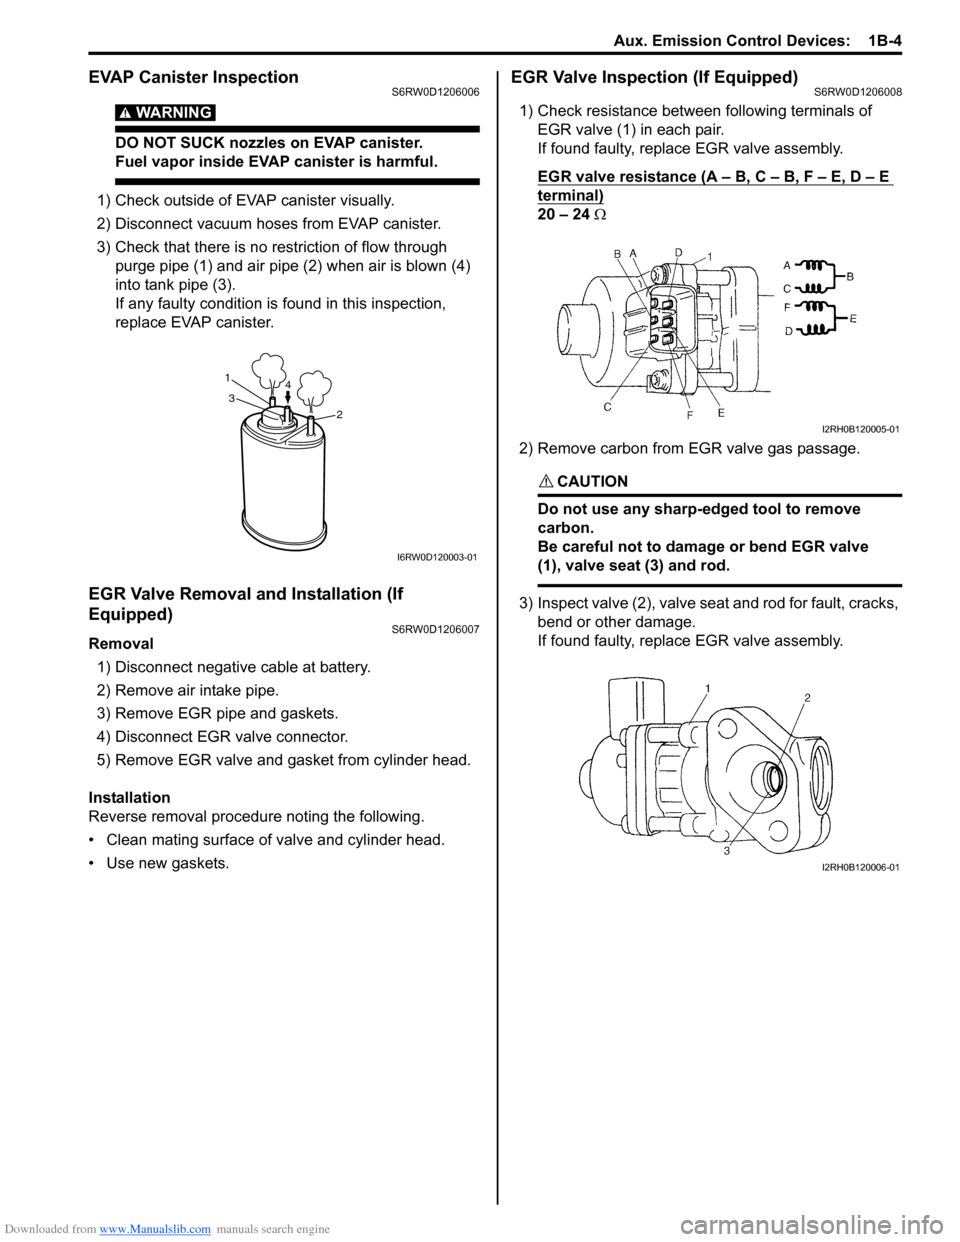 SUZUKI SX4 2006 1.G Service Workshop Manual Downloaded from www.Manualslib.com manuals search engine Aux. Emission Control Devices:  1B-4
EVAP Canister InspectionS6RW0D1206006
WARNING! 
DO NOT SUCK nozzles on EVAP canister. 
Fuel vapor inside E